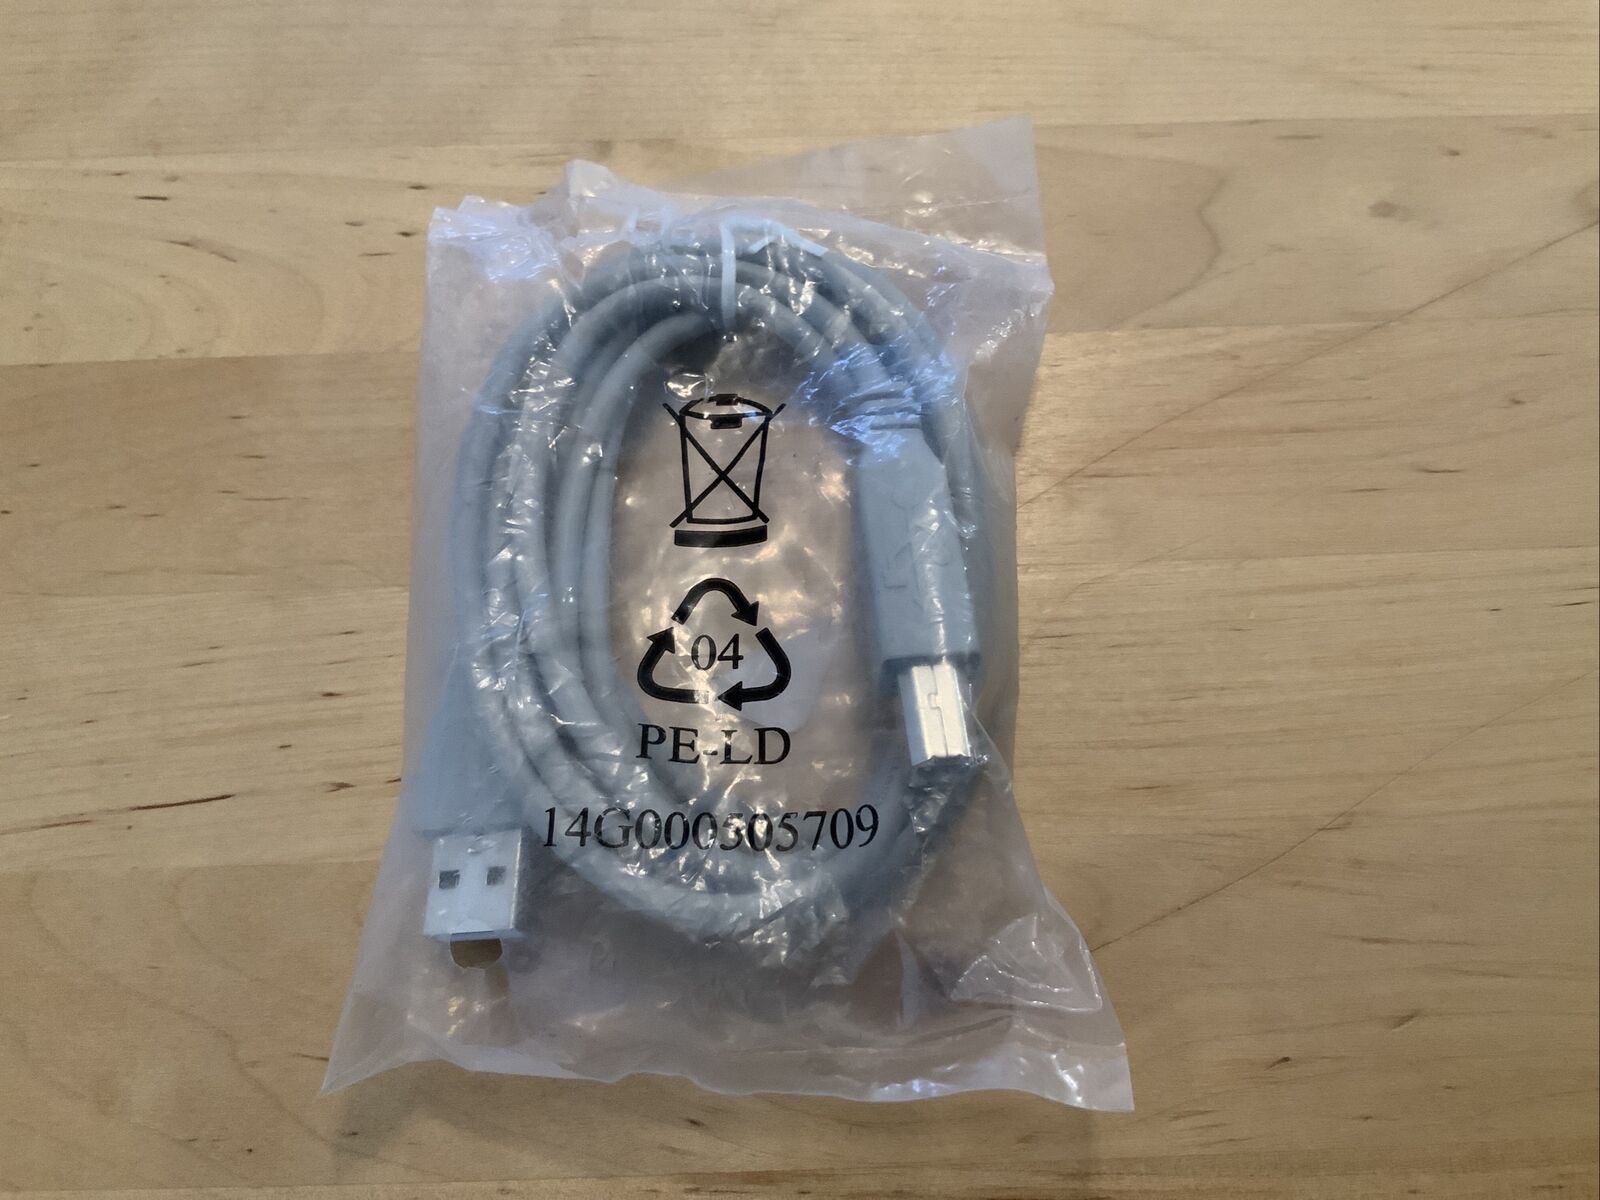 Printer Cable #14g000505709 NEW sealed USB